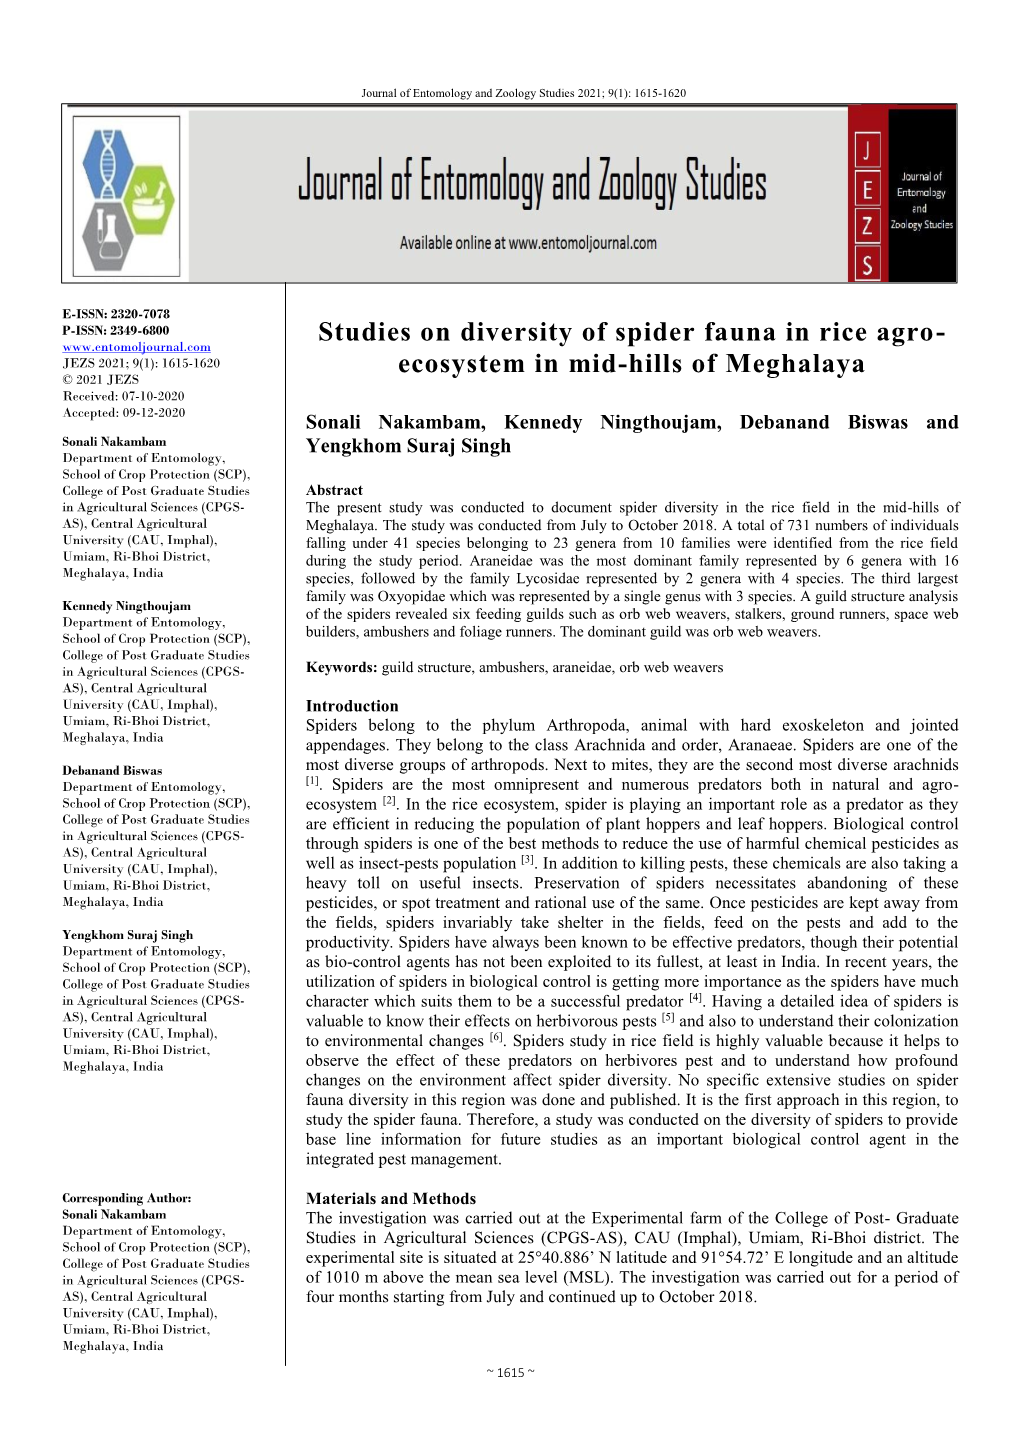 Studies on Diversity of Spider Fauna in Rice Agro- Ecosystem in Mid-Hills Of